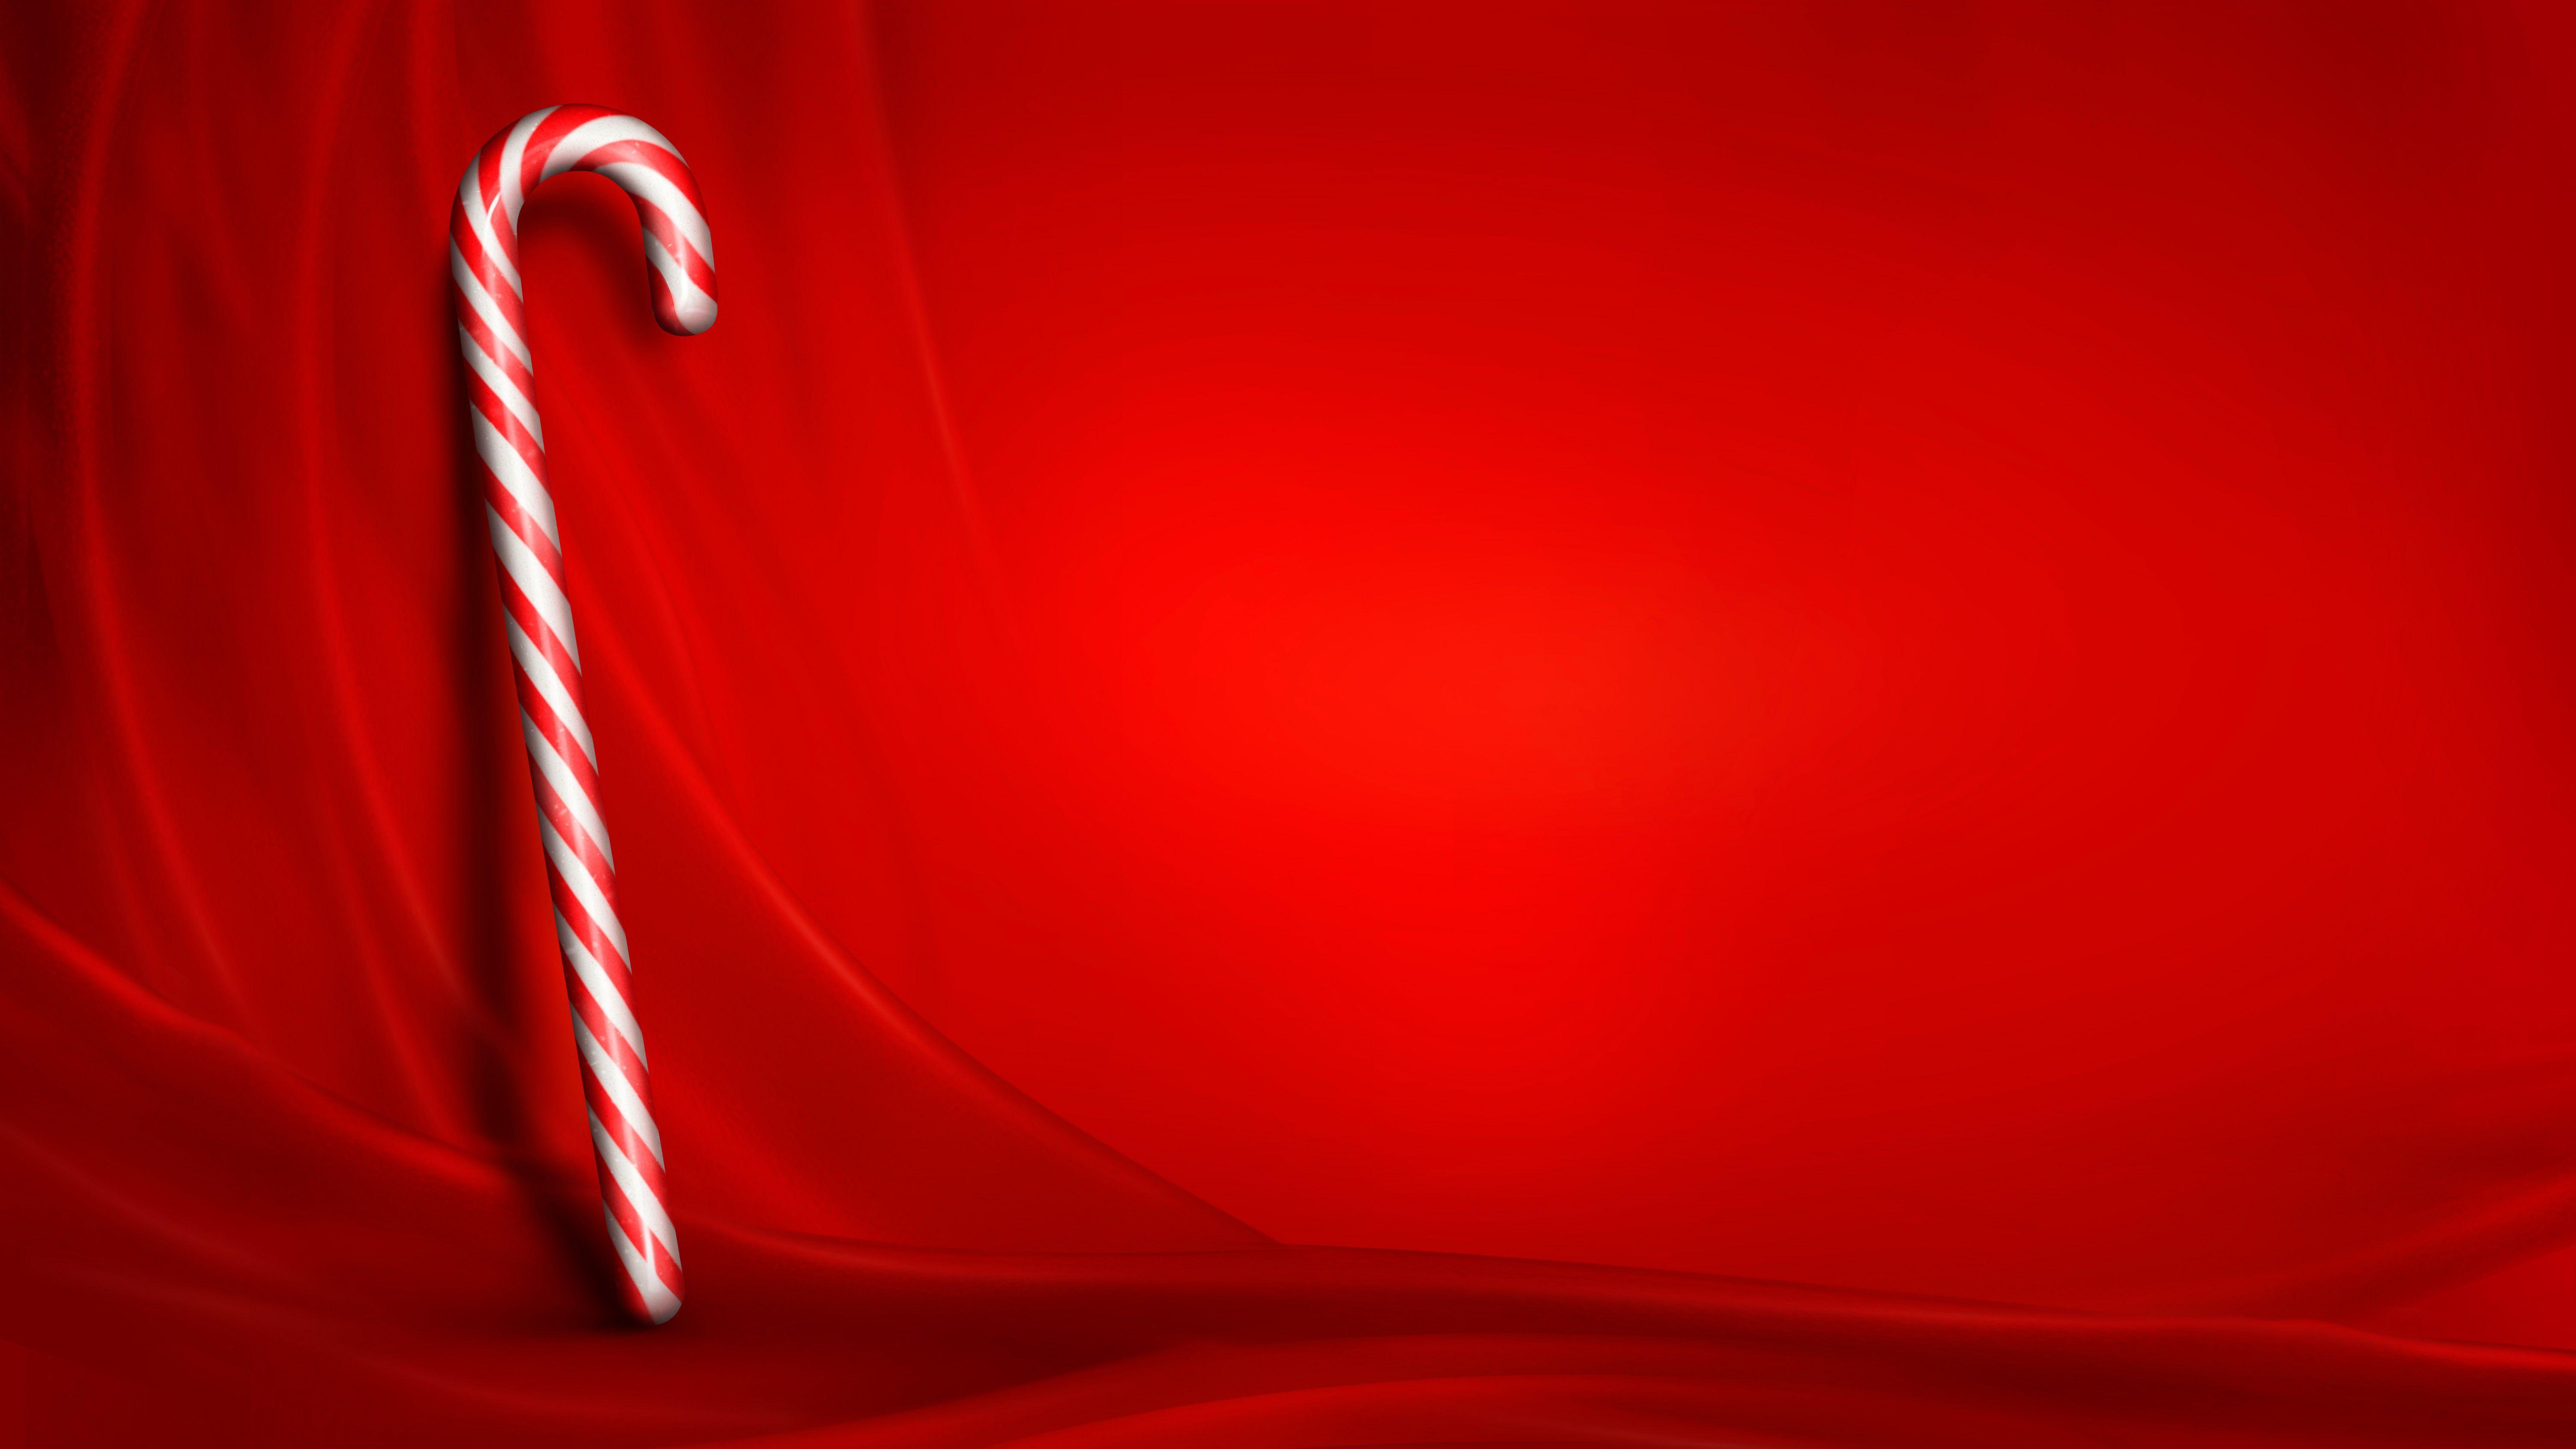 Candy Cane On Red Background HD Wallpaper